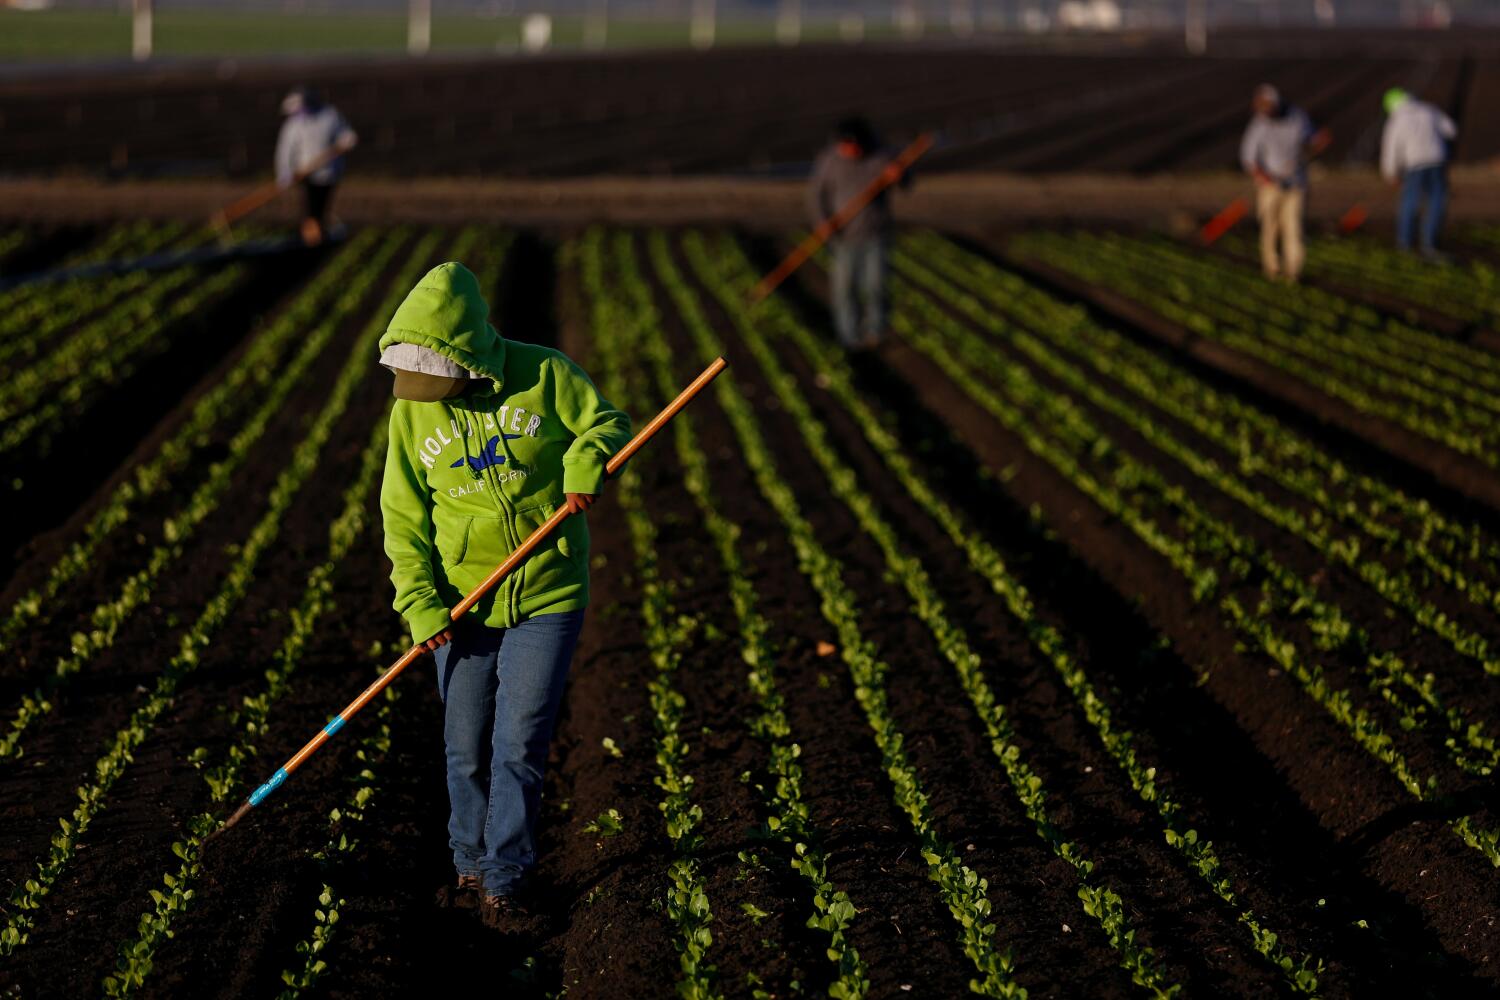 Tracking the trouble and hope that define the American farm  